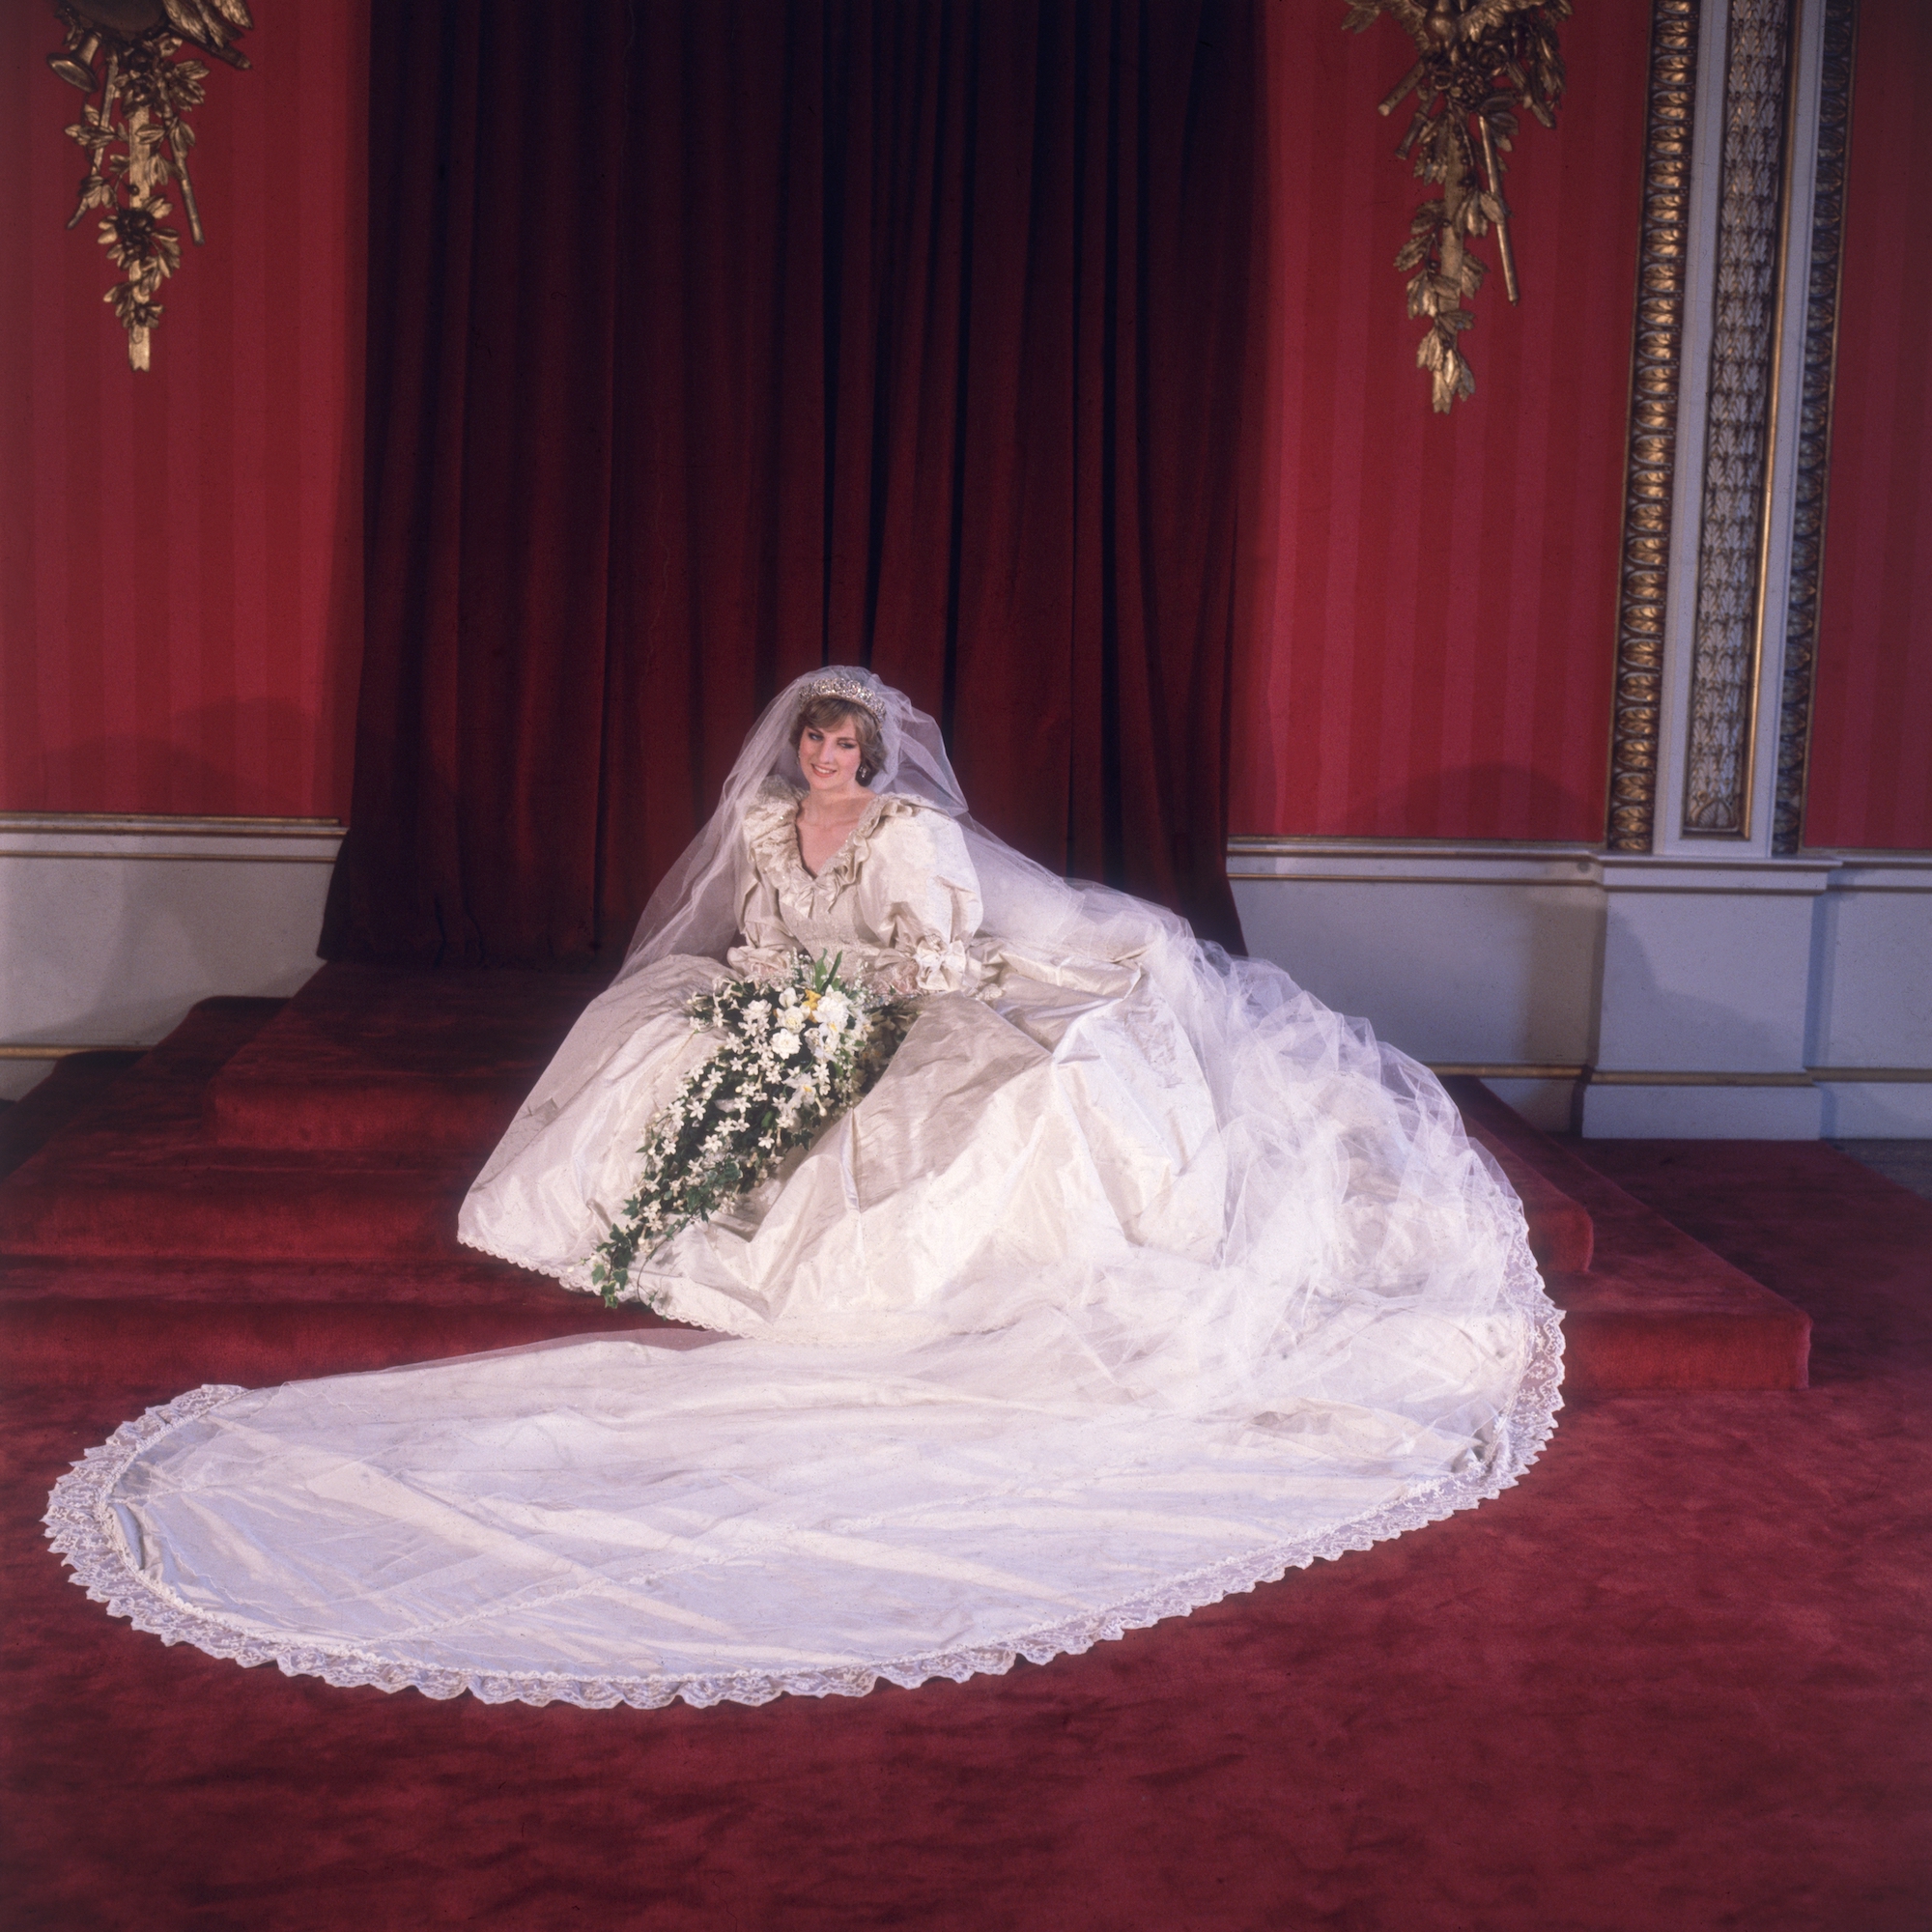 Princess Diana poses in her wedding gown for a formal portrait